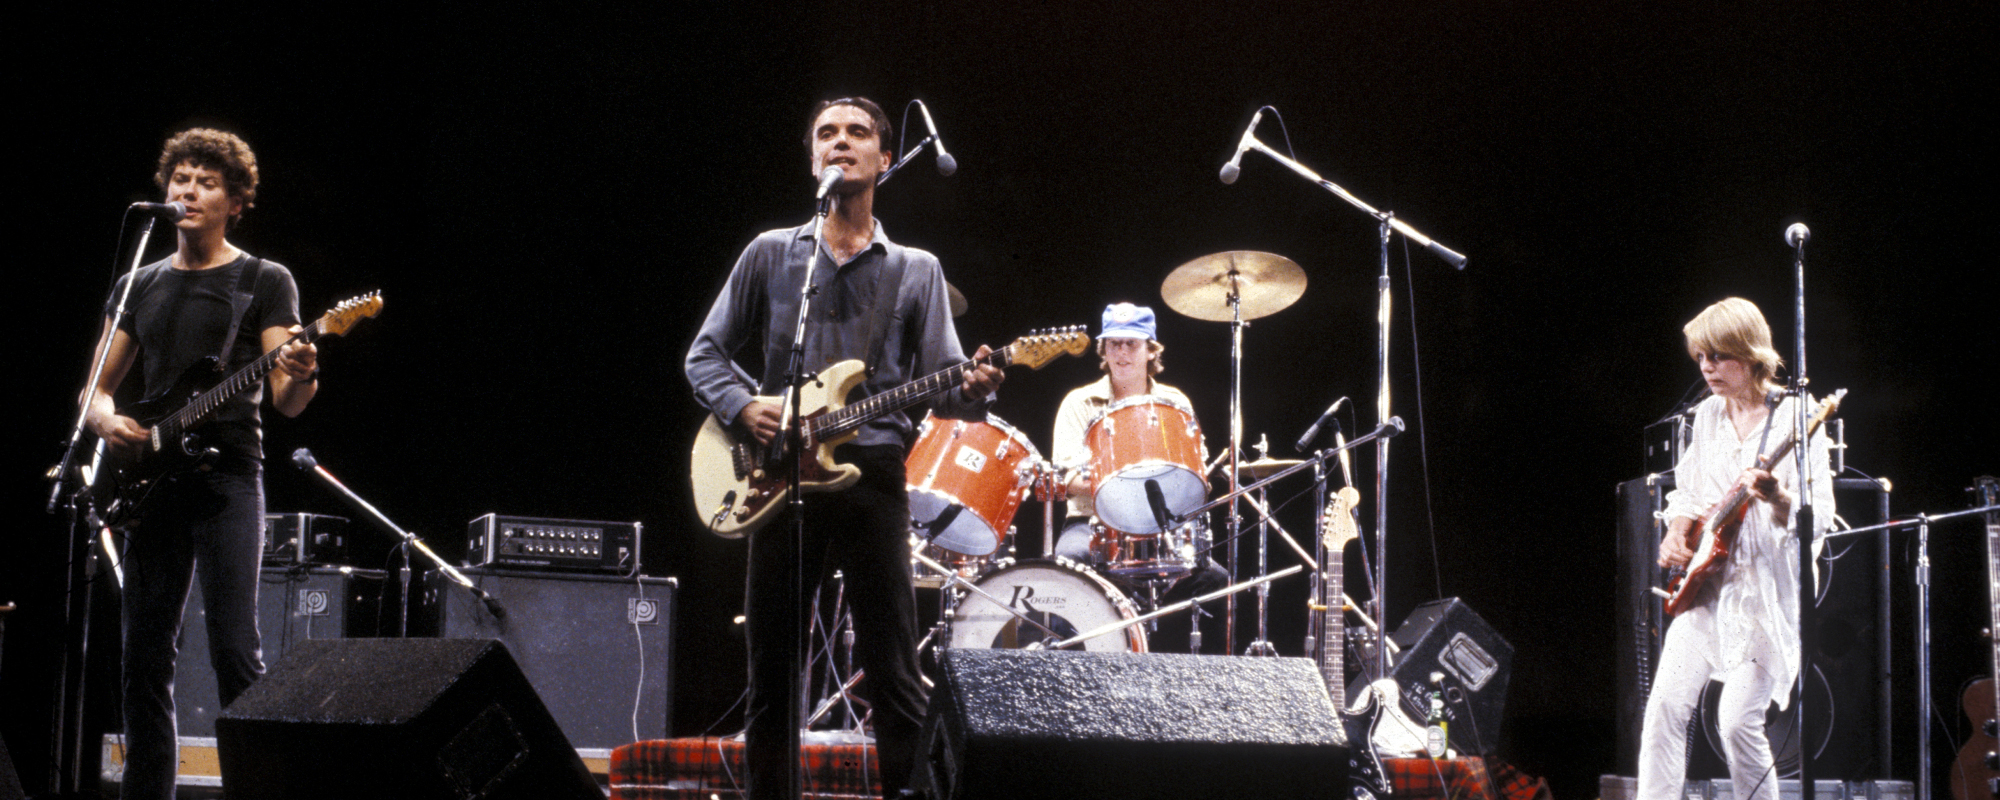 The Meaning Behind “Once in a Lifetime” by Talking Heads and How It Was Inspired by Preachers on the Radio